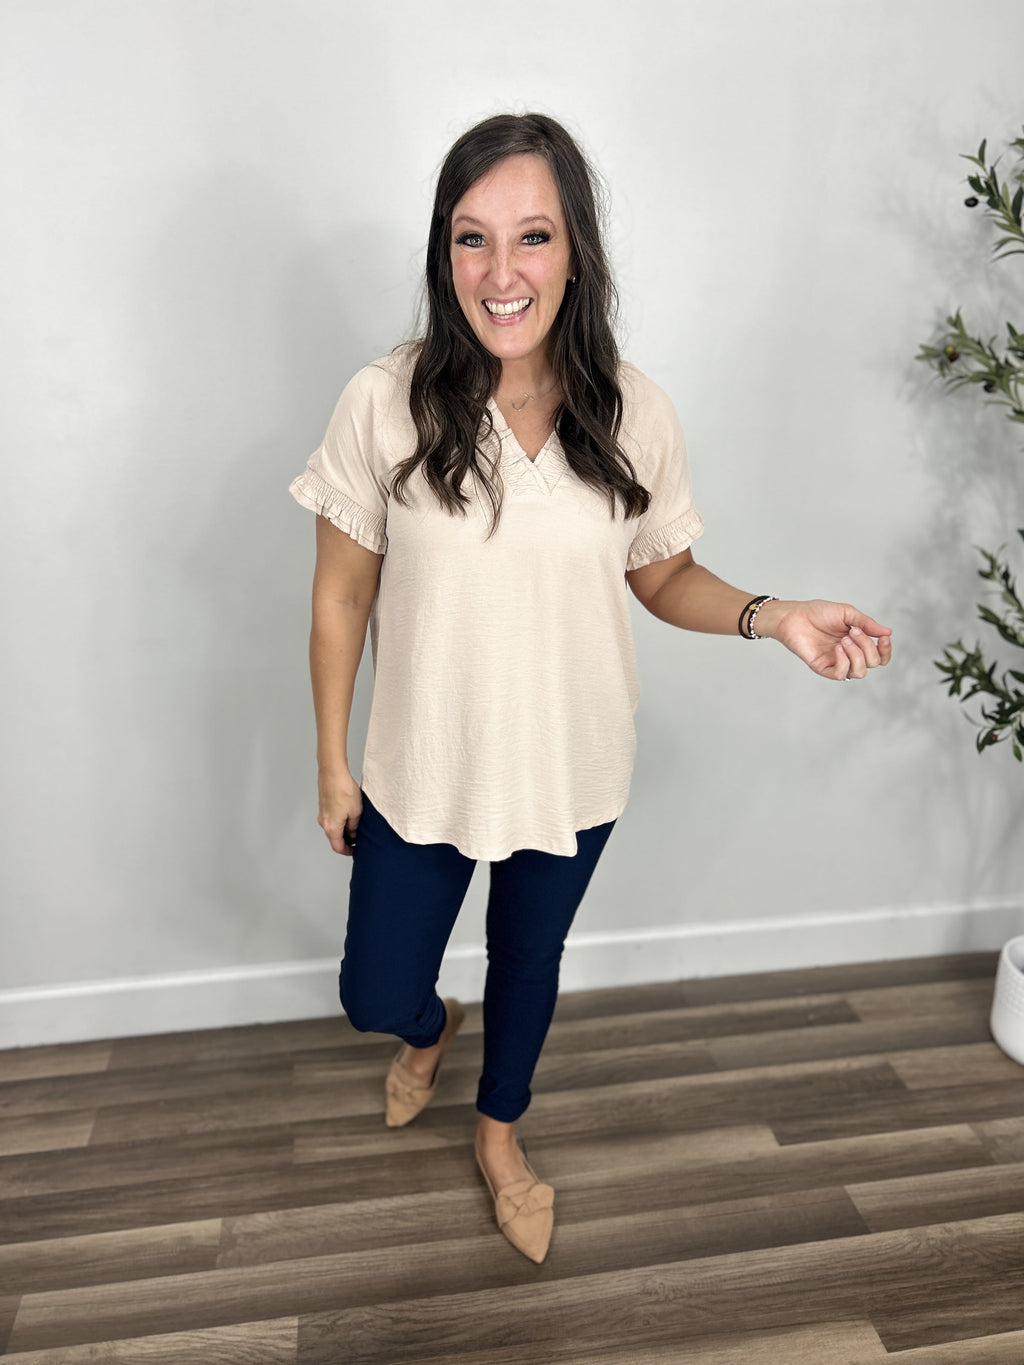 Women's cap sleeve v neck top in ivory paired with navy skinny jeans and camel color flat shoes.